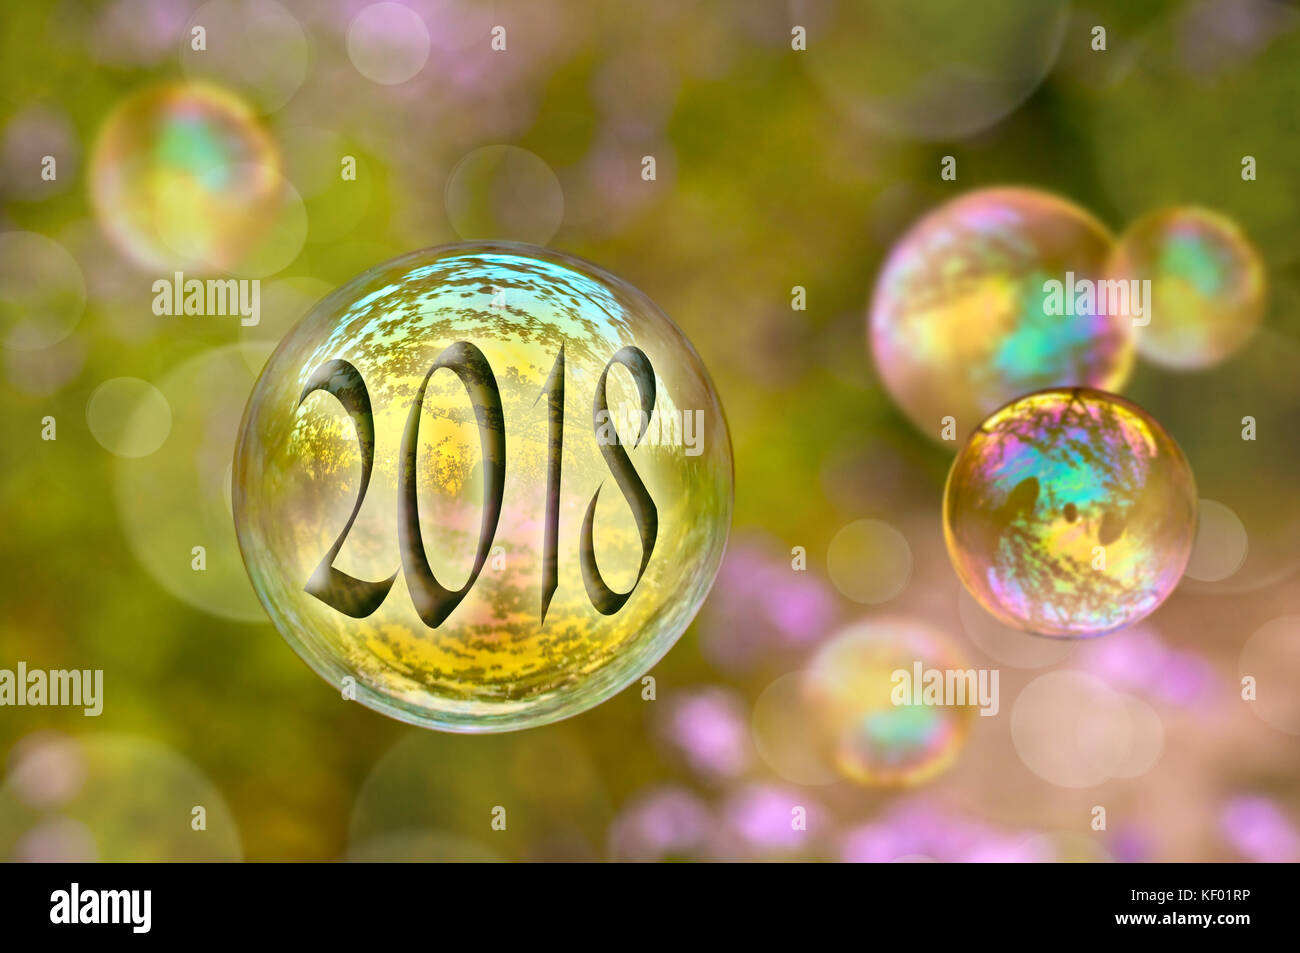 2018 soap bubble greeting card Stock Photo